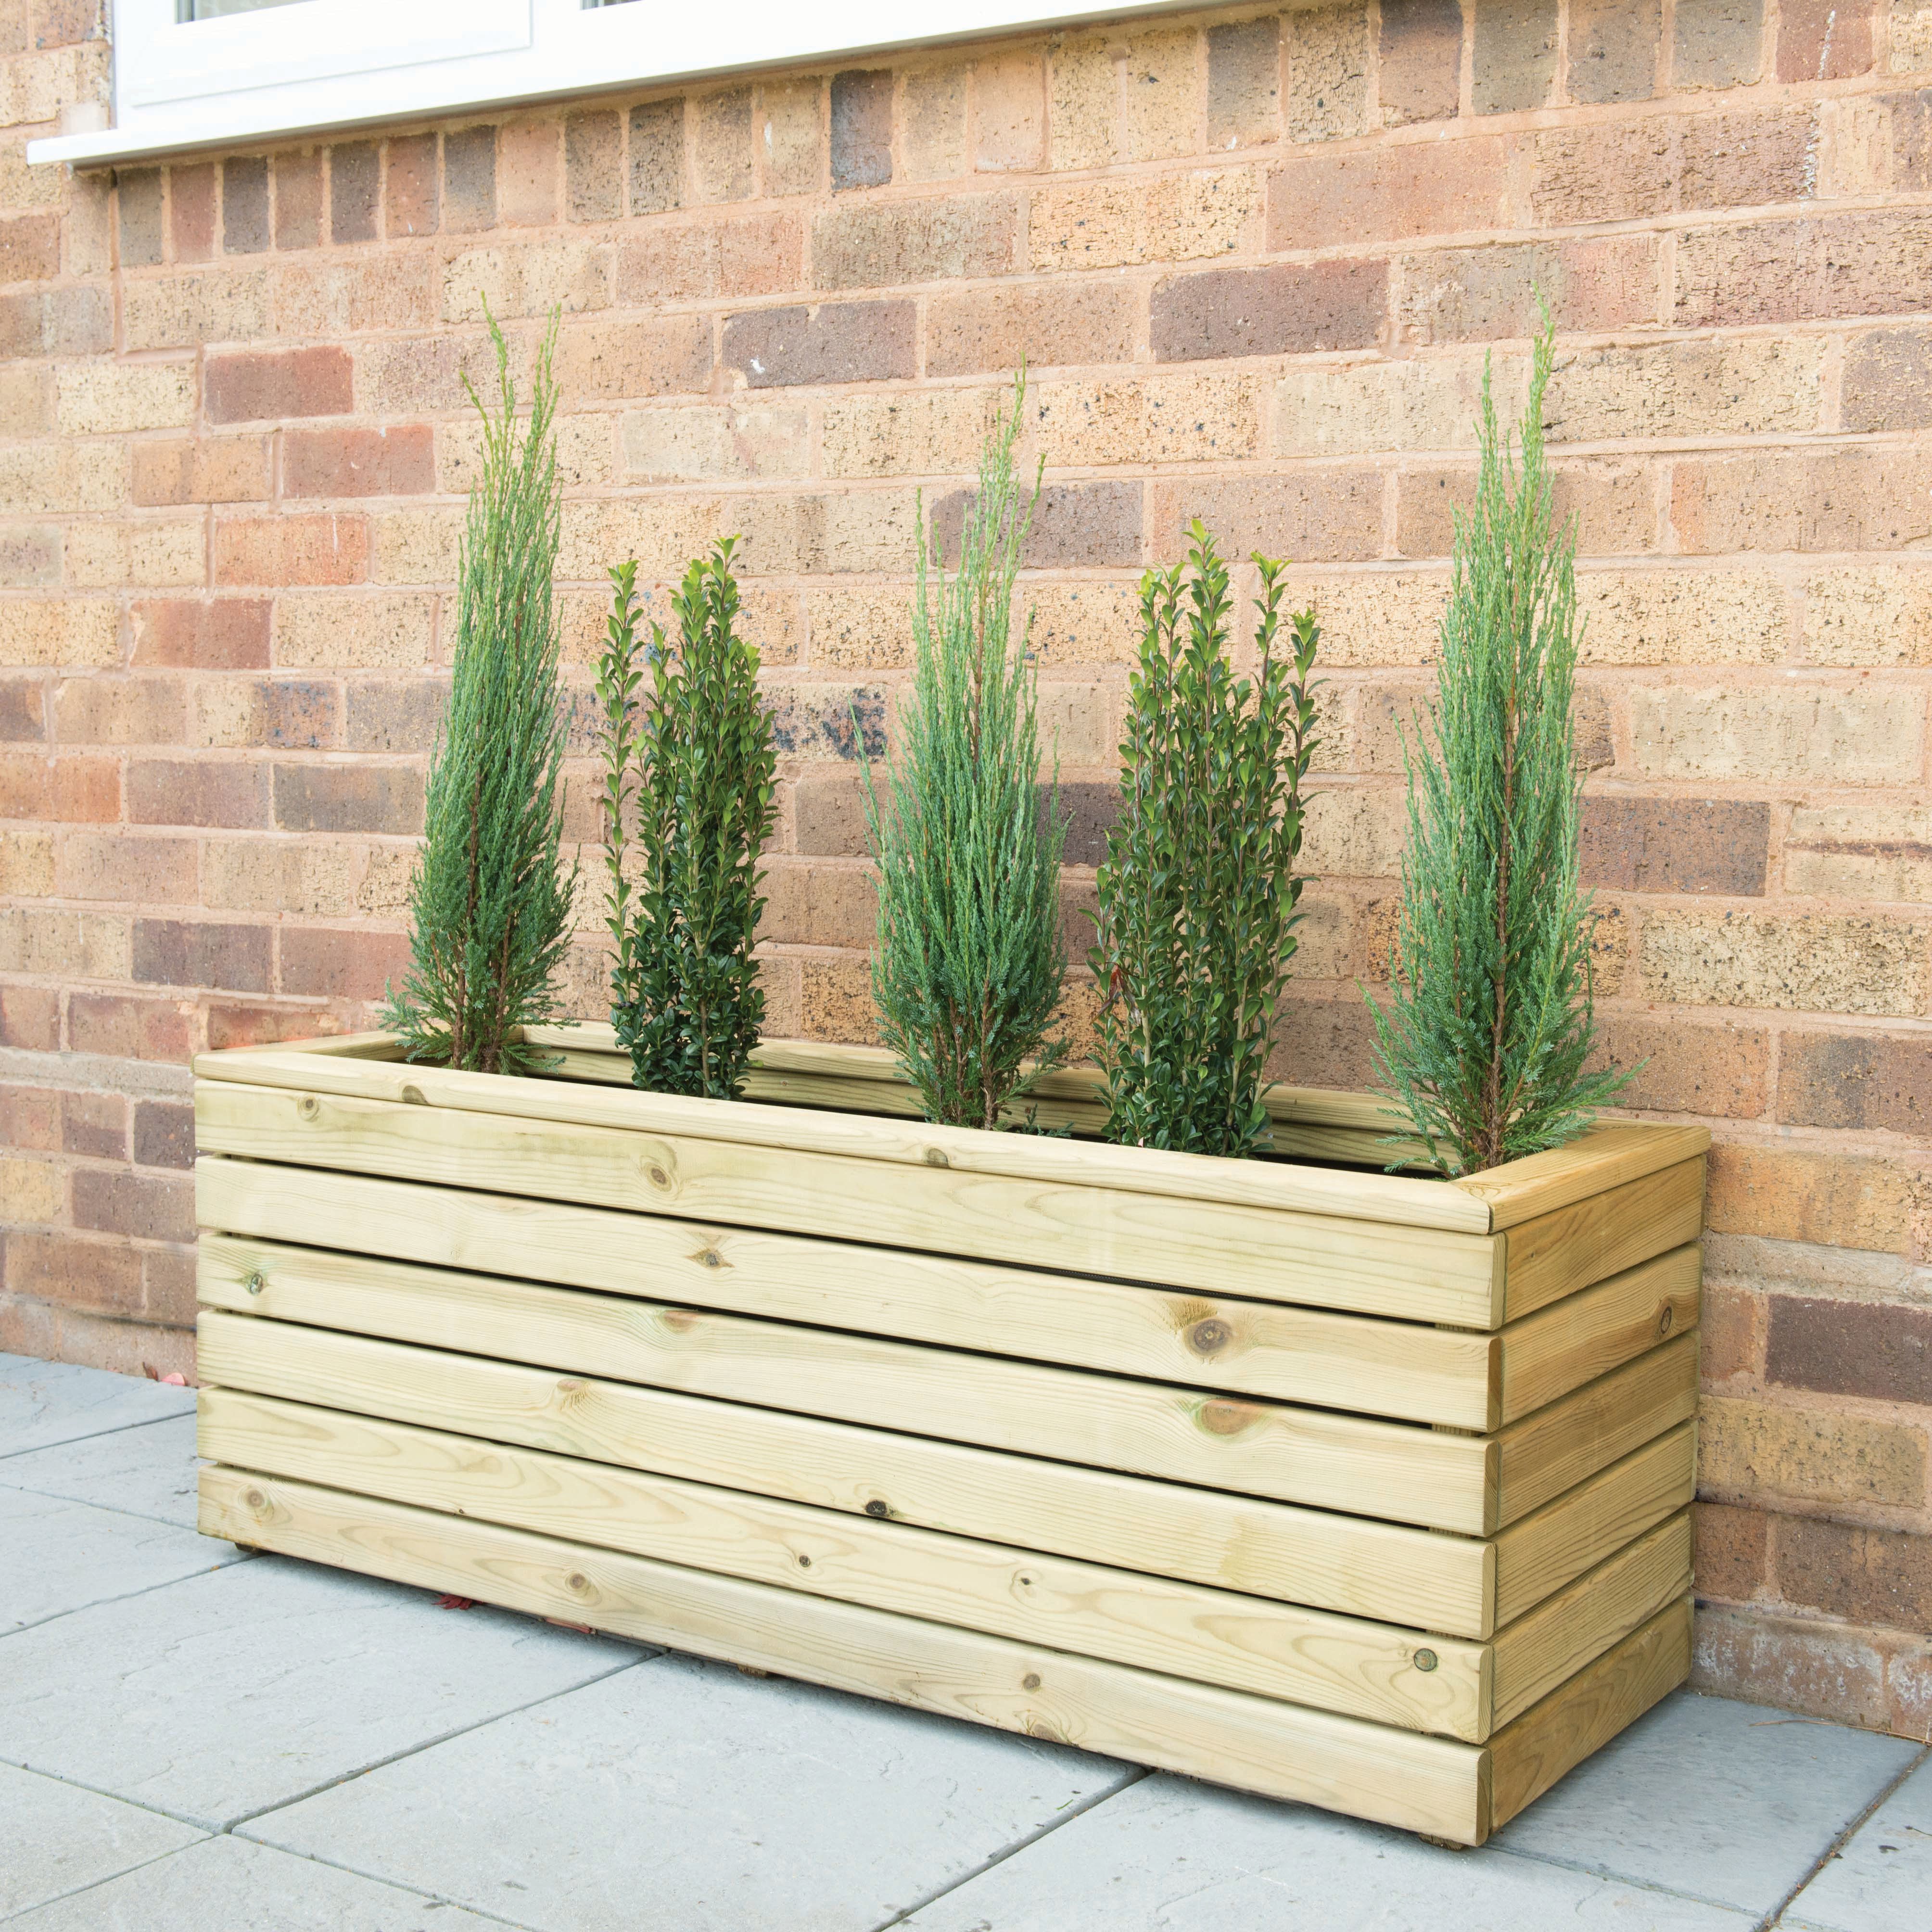 Image of Forest Garden Linear Long Planter - 400mm x 1.2m